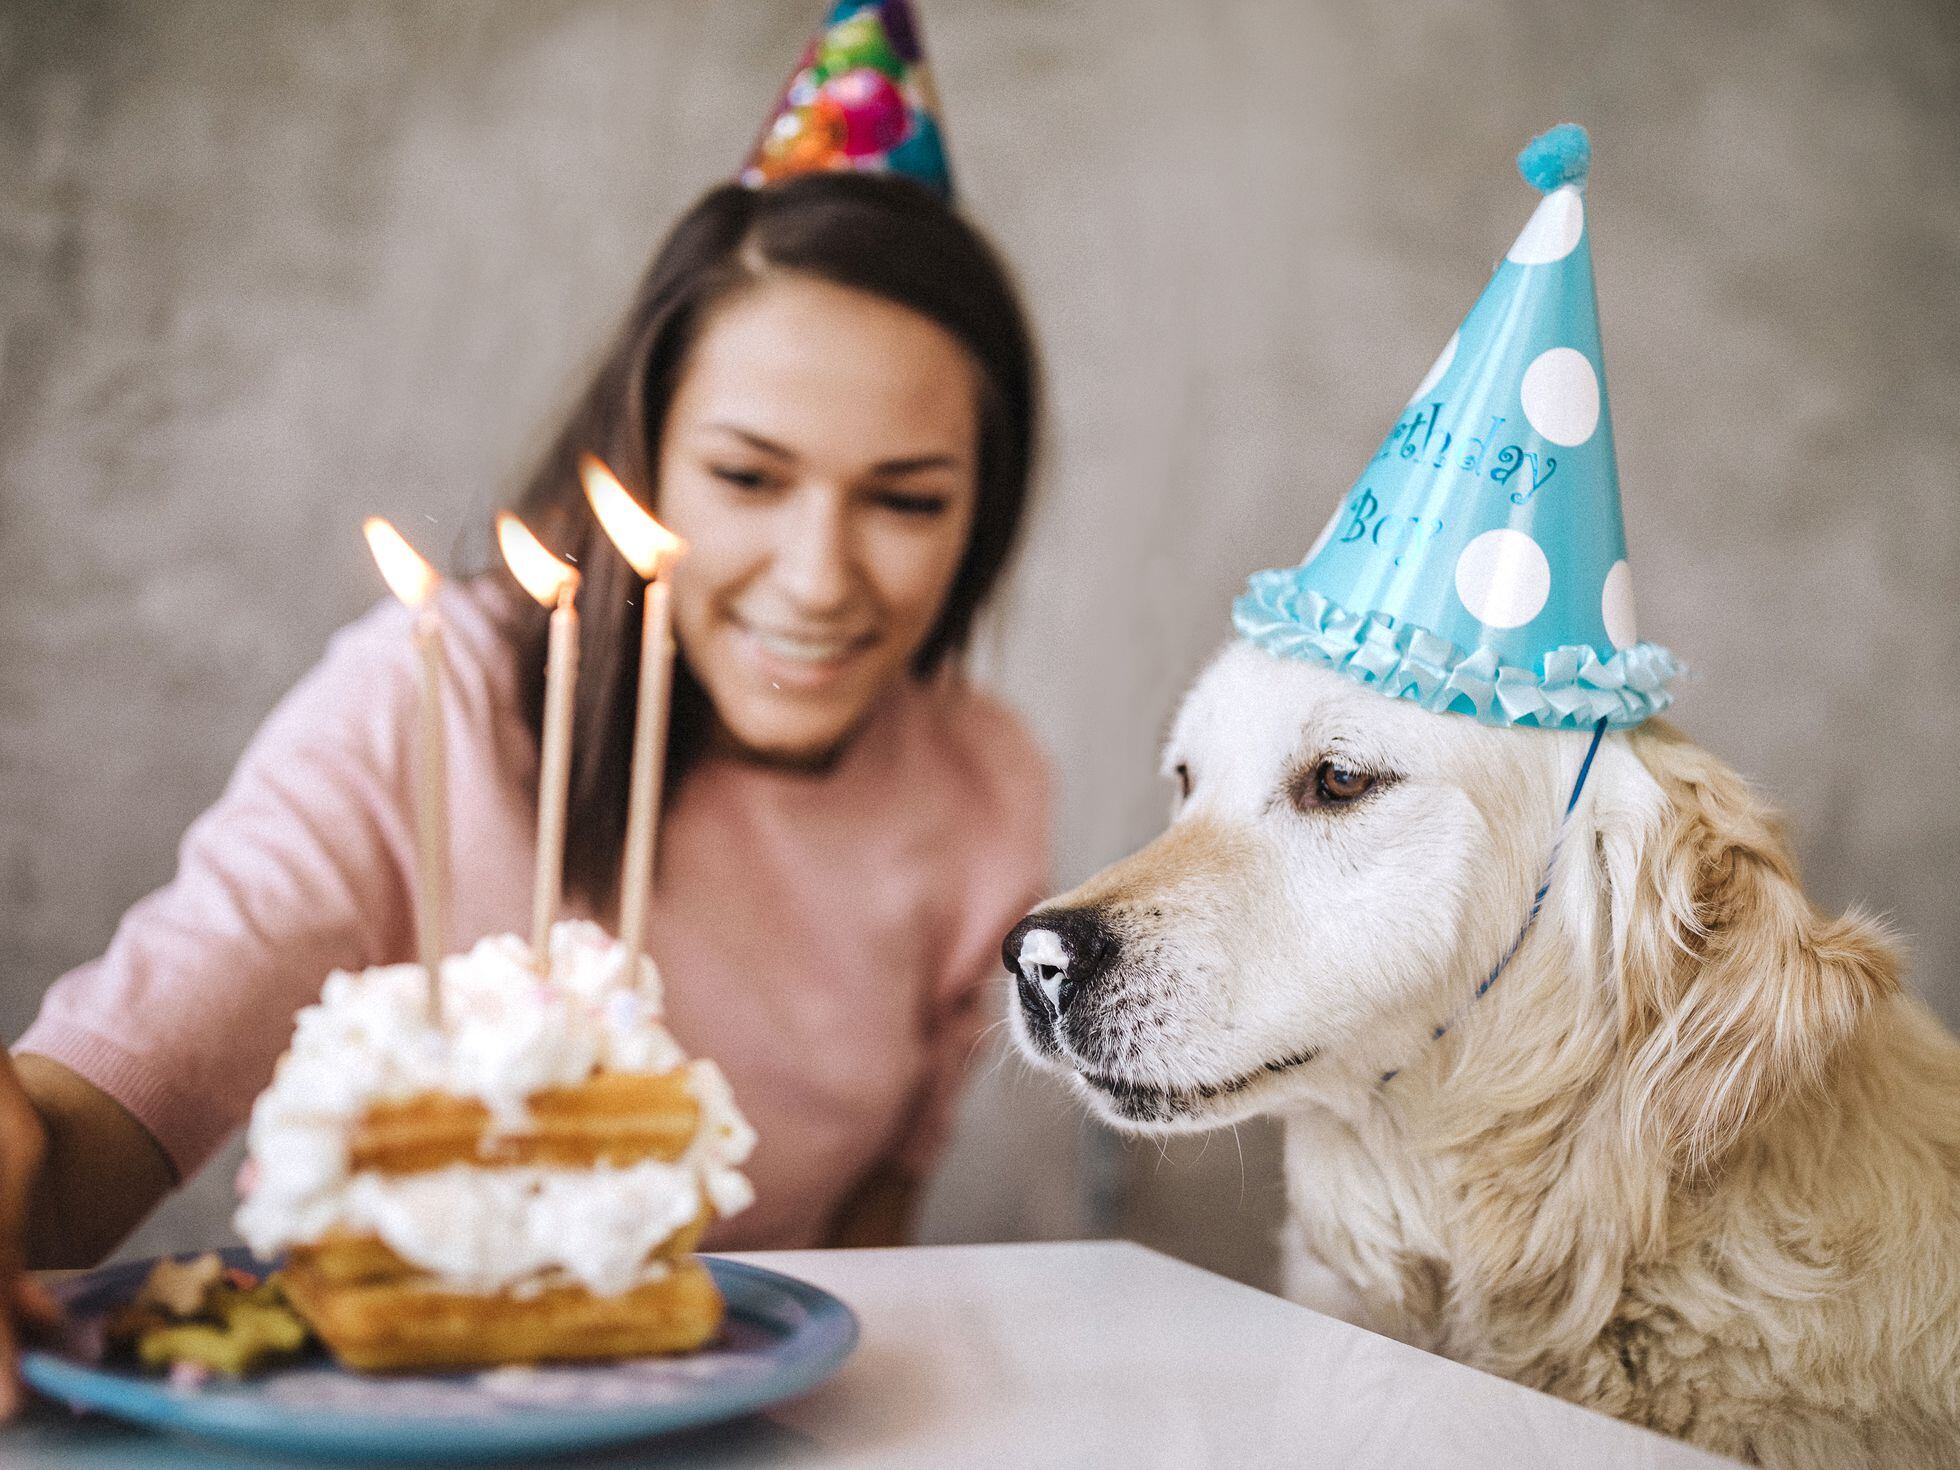 Does your dog really care about its birthday? The mistake of